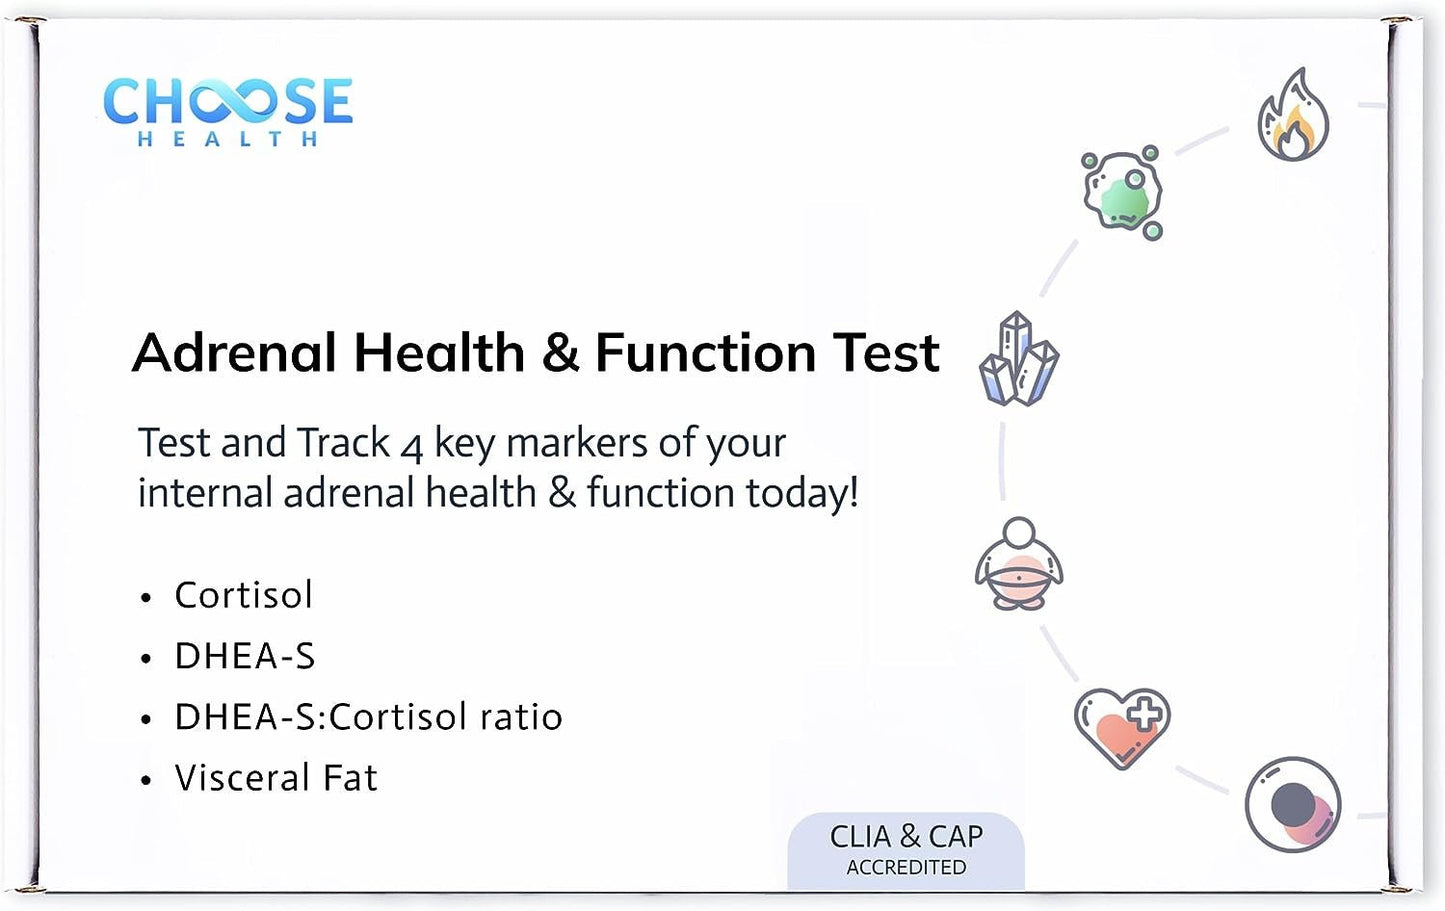 4-In-1 Cortisol & DHEA-S Test | Adrenal Health & Function Test | Stress Test | Anabolic & Catabolic Imbalance | Visceral Fat | Cap & CLIA Accredited Lab | Not Avail in NY RI…